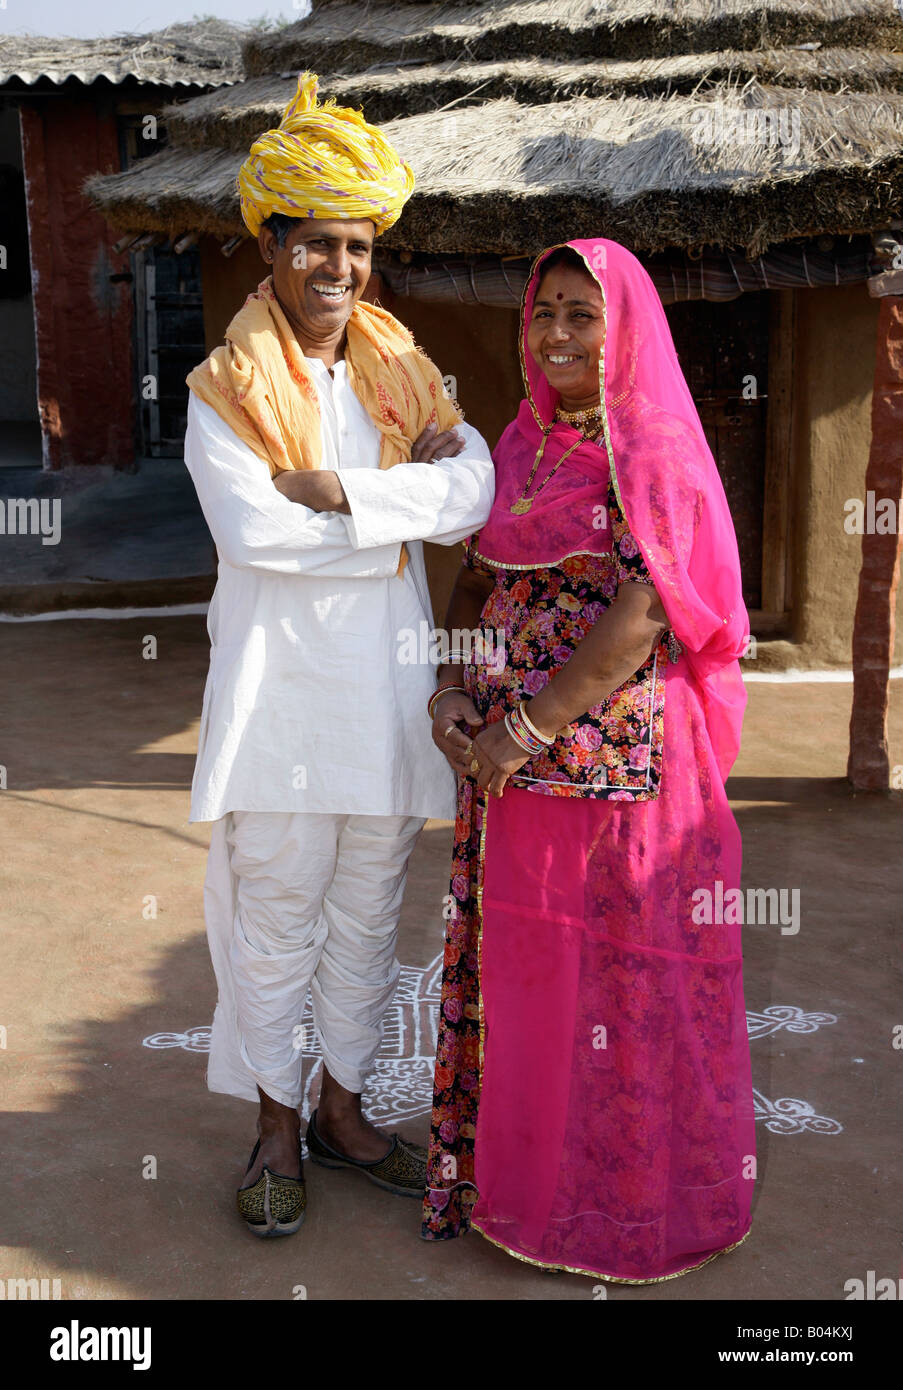 7,250 Rajasthani Traditional Dress Images, Stock Photos & Vectors |  Shutterstock